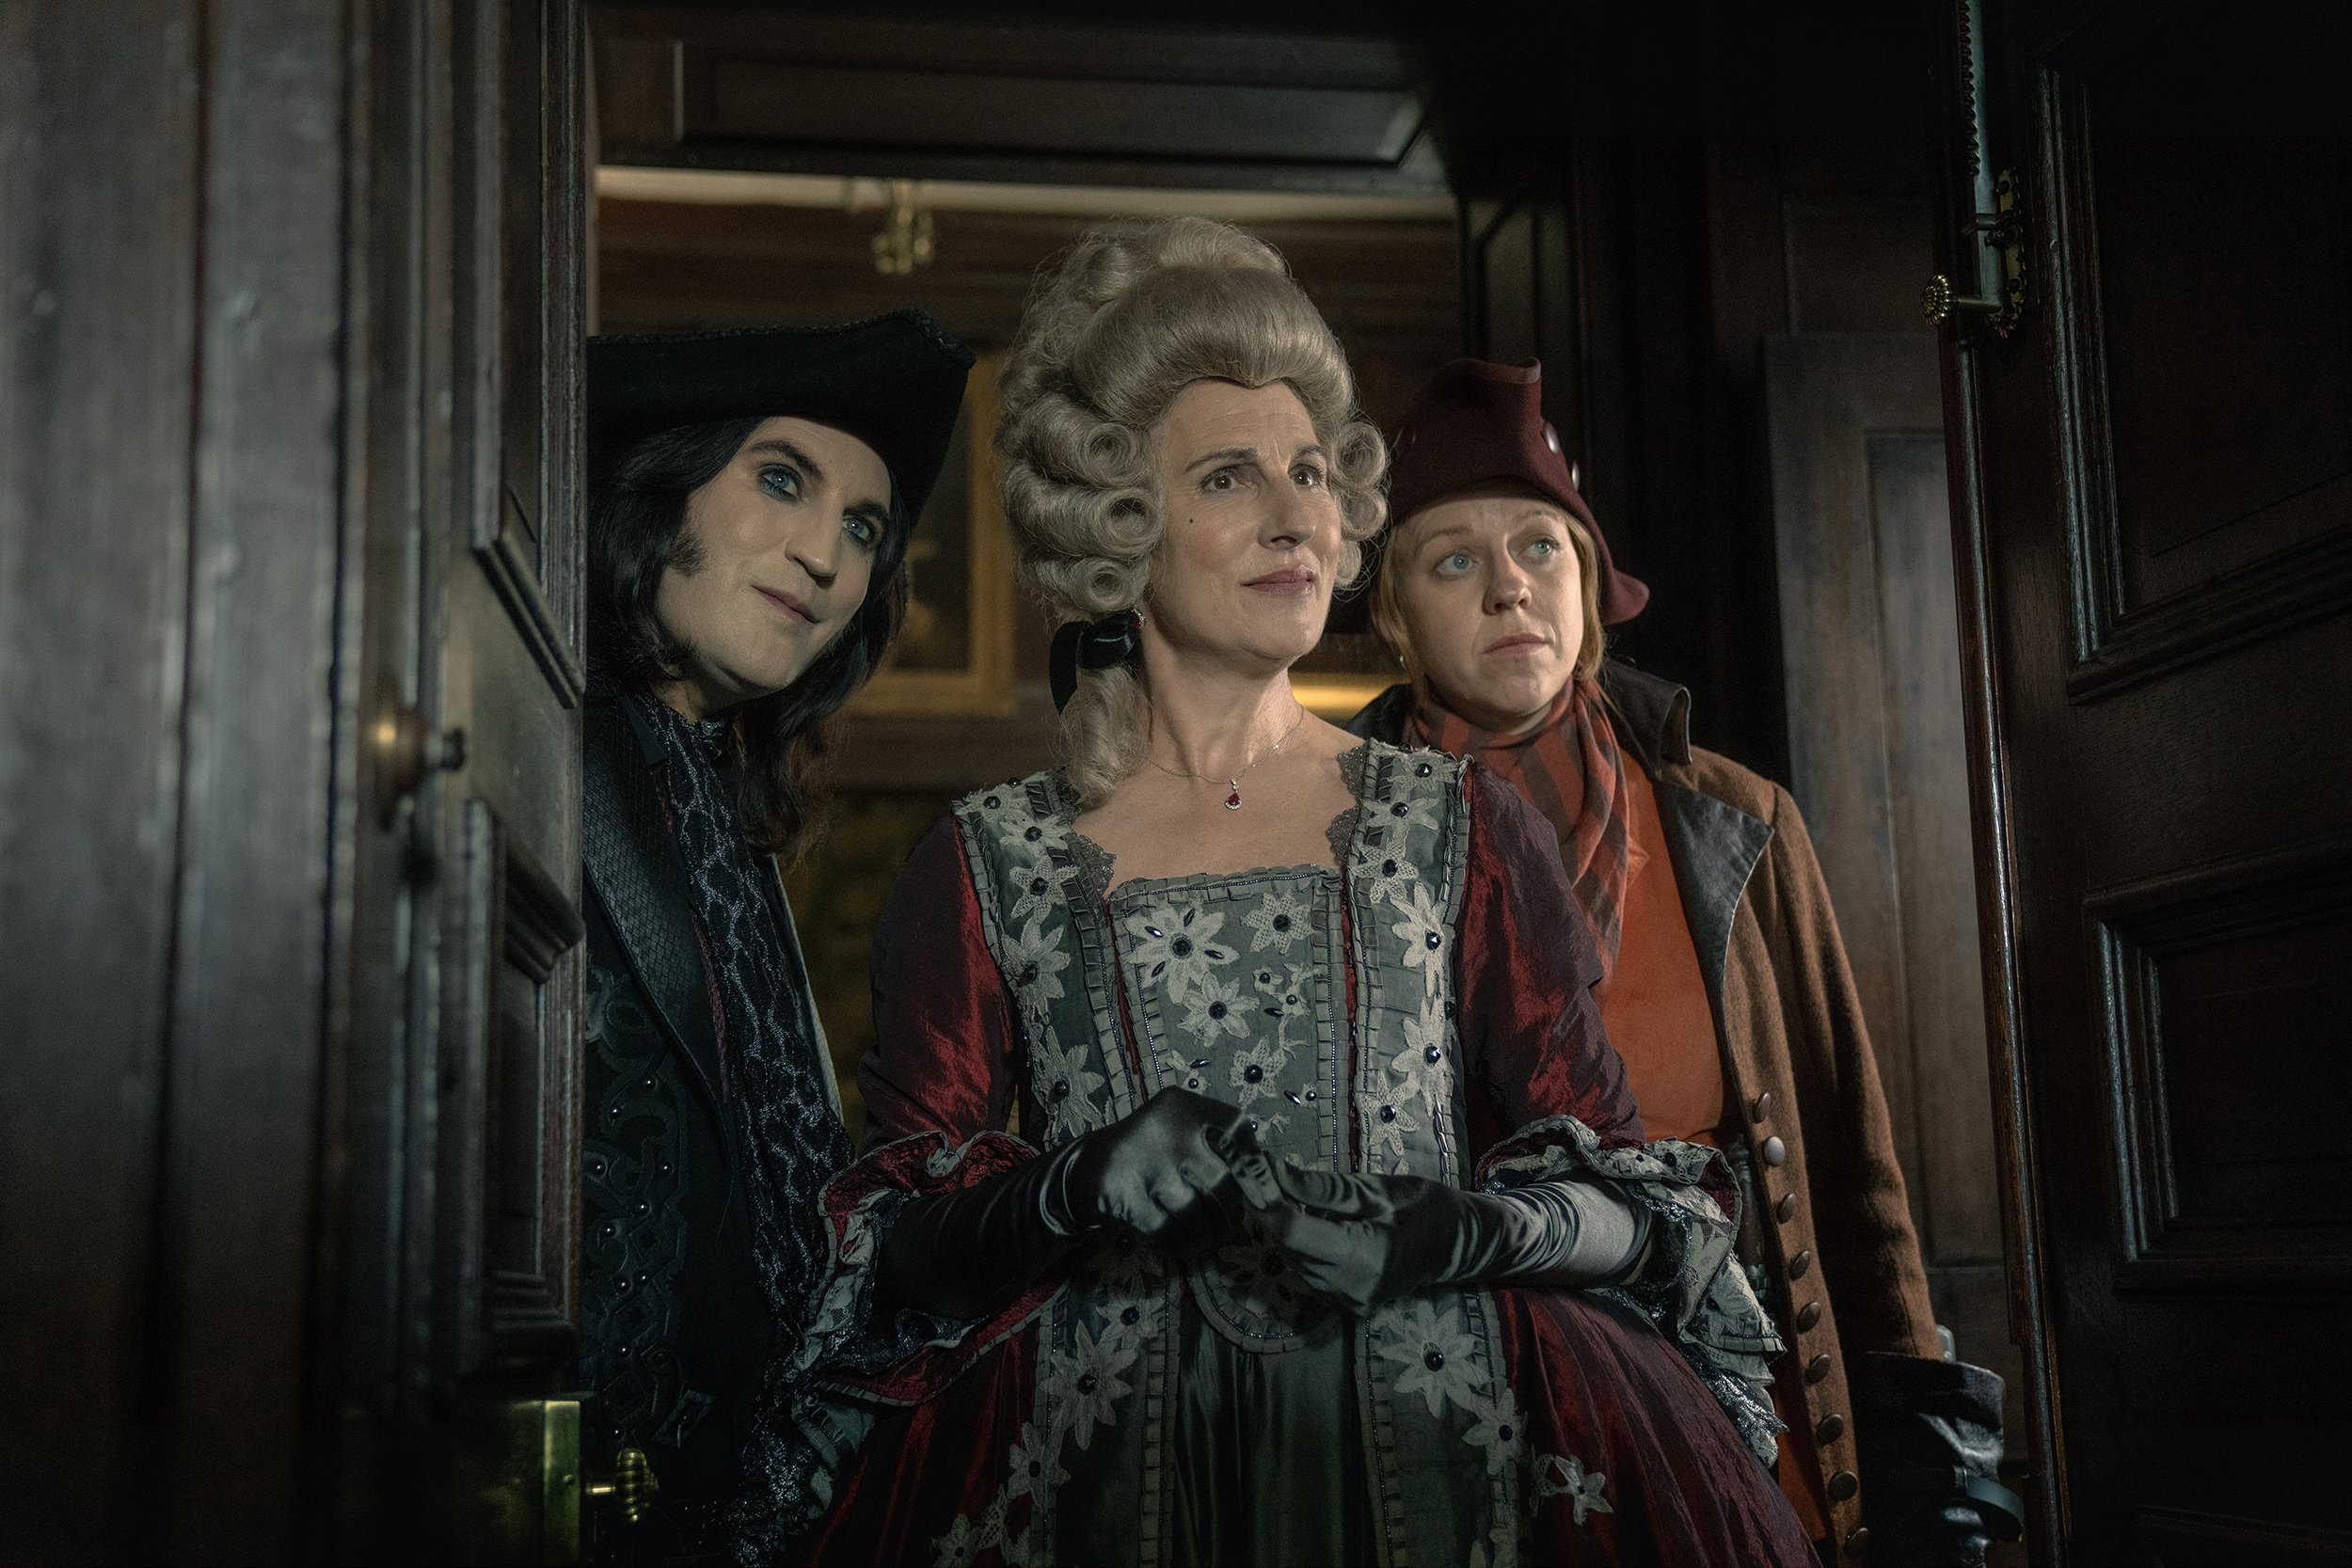 Noel Fielding, Tamsin Greig, and Ellie White in 'The Completely Made-up Adventures of Dick Turpin' Season 1